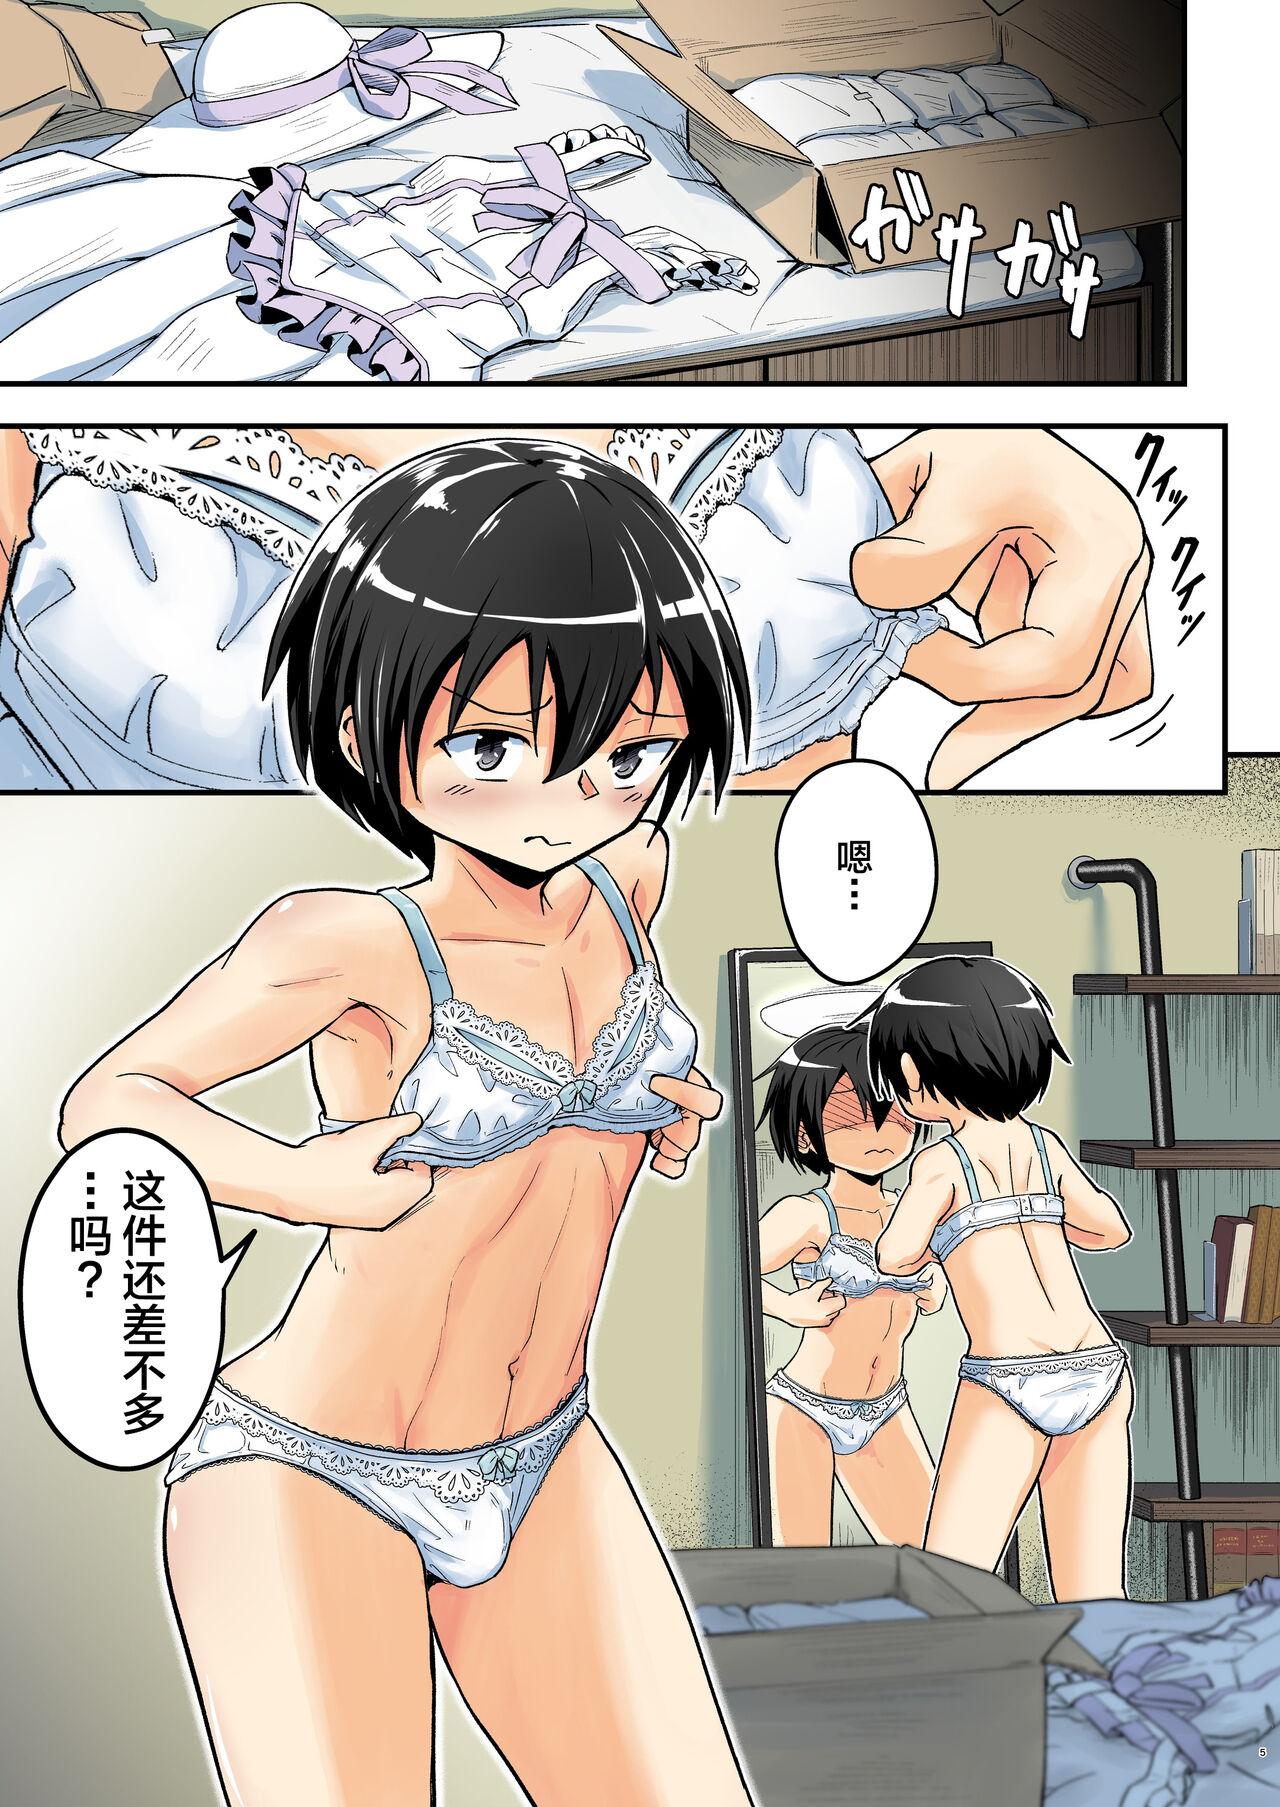 Horny Kiriko Route Another #07 - Sword art online Face Fucking - Page 5